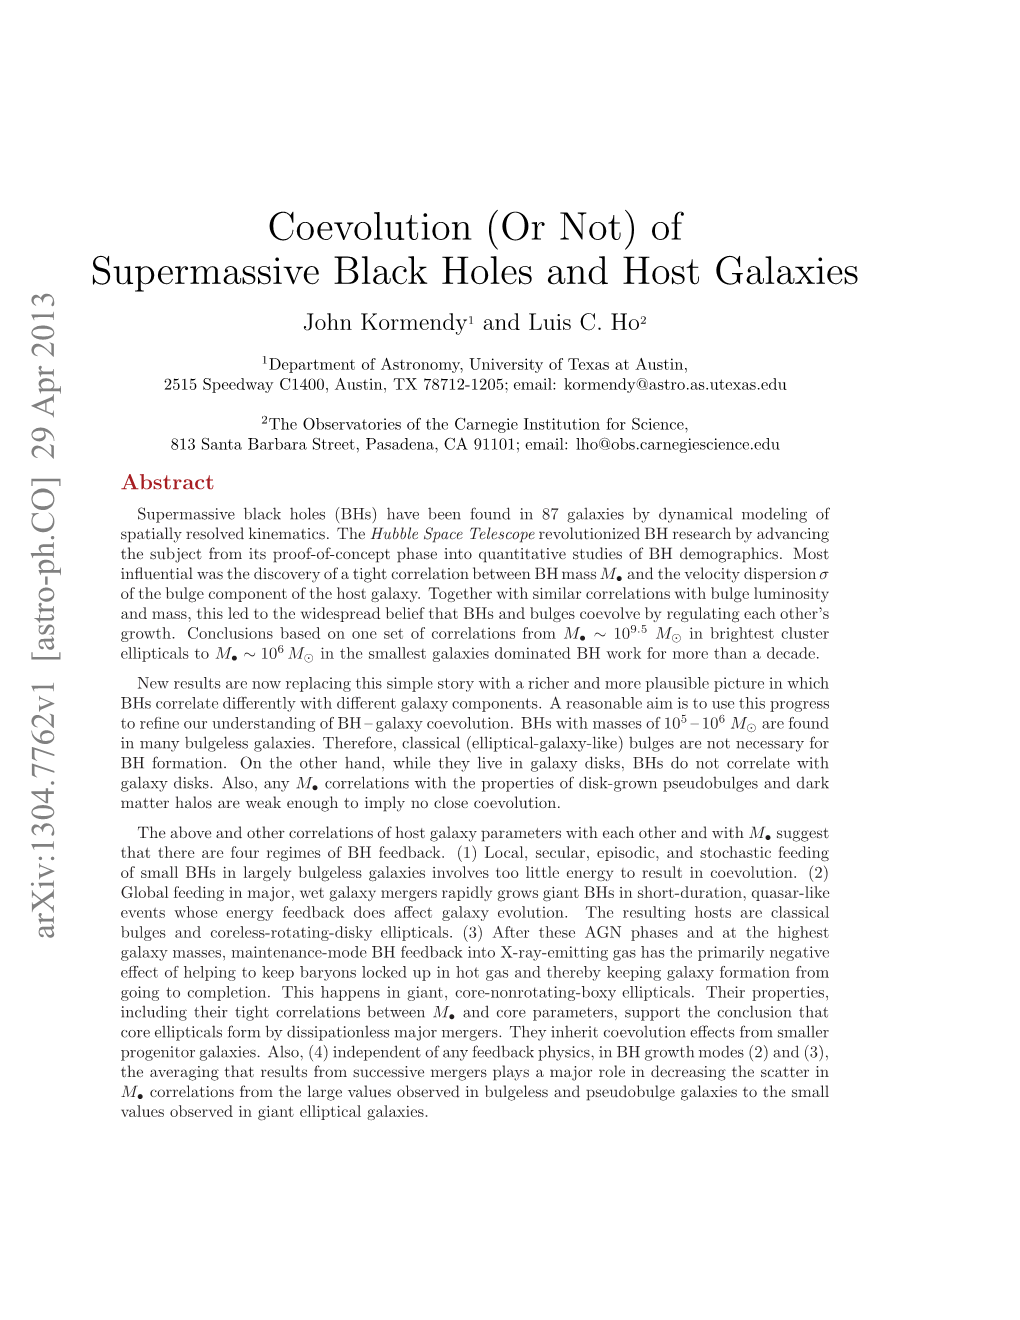 Coevolution (Or Not) of Supermassive Black Holes and Host Galaxies